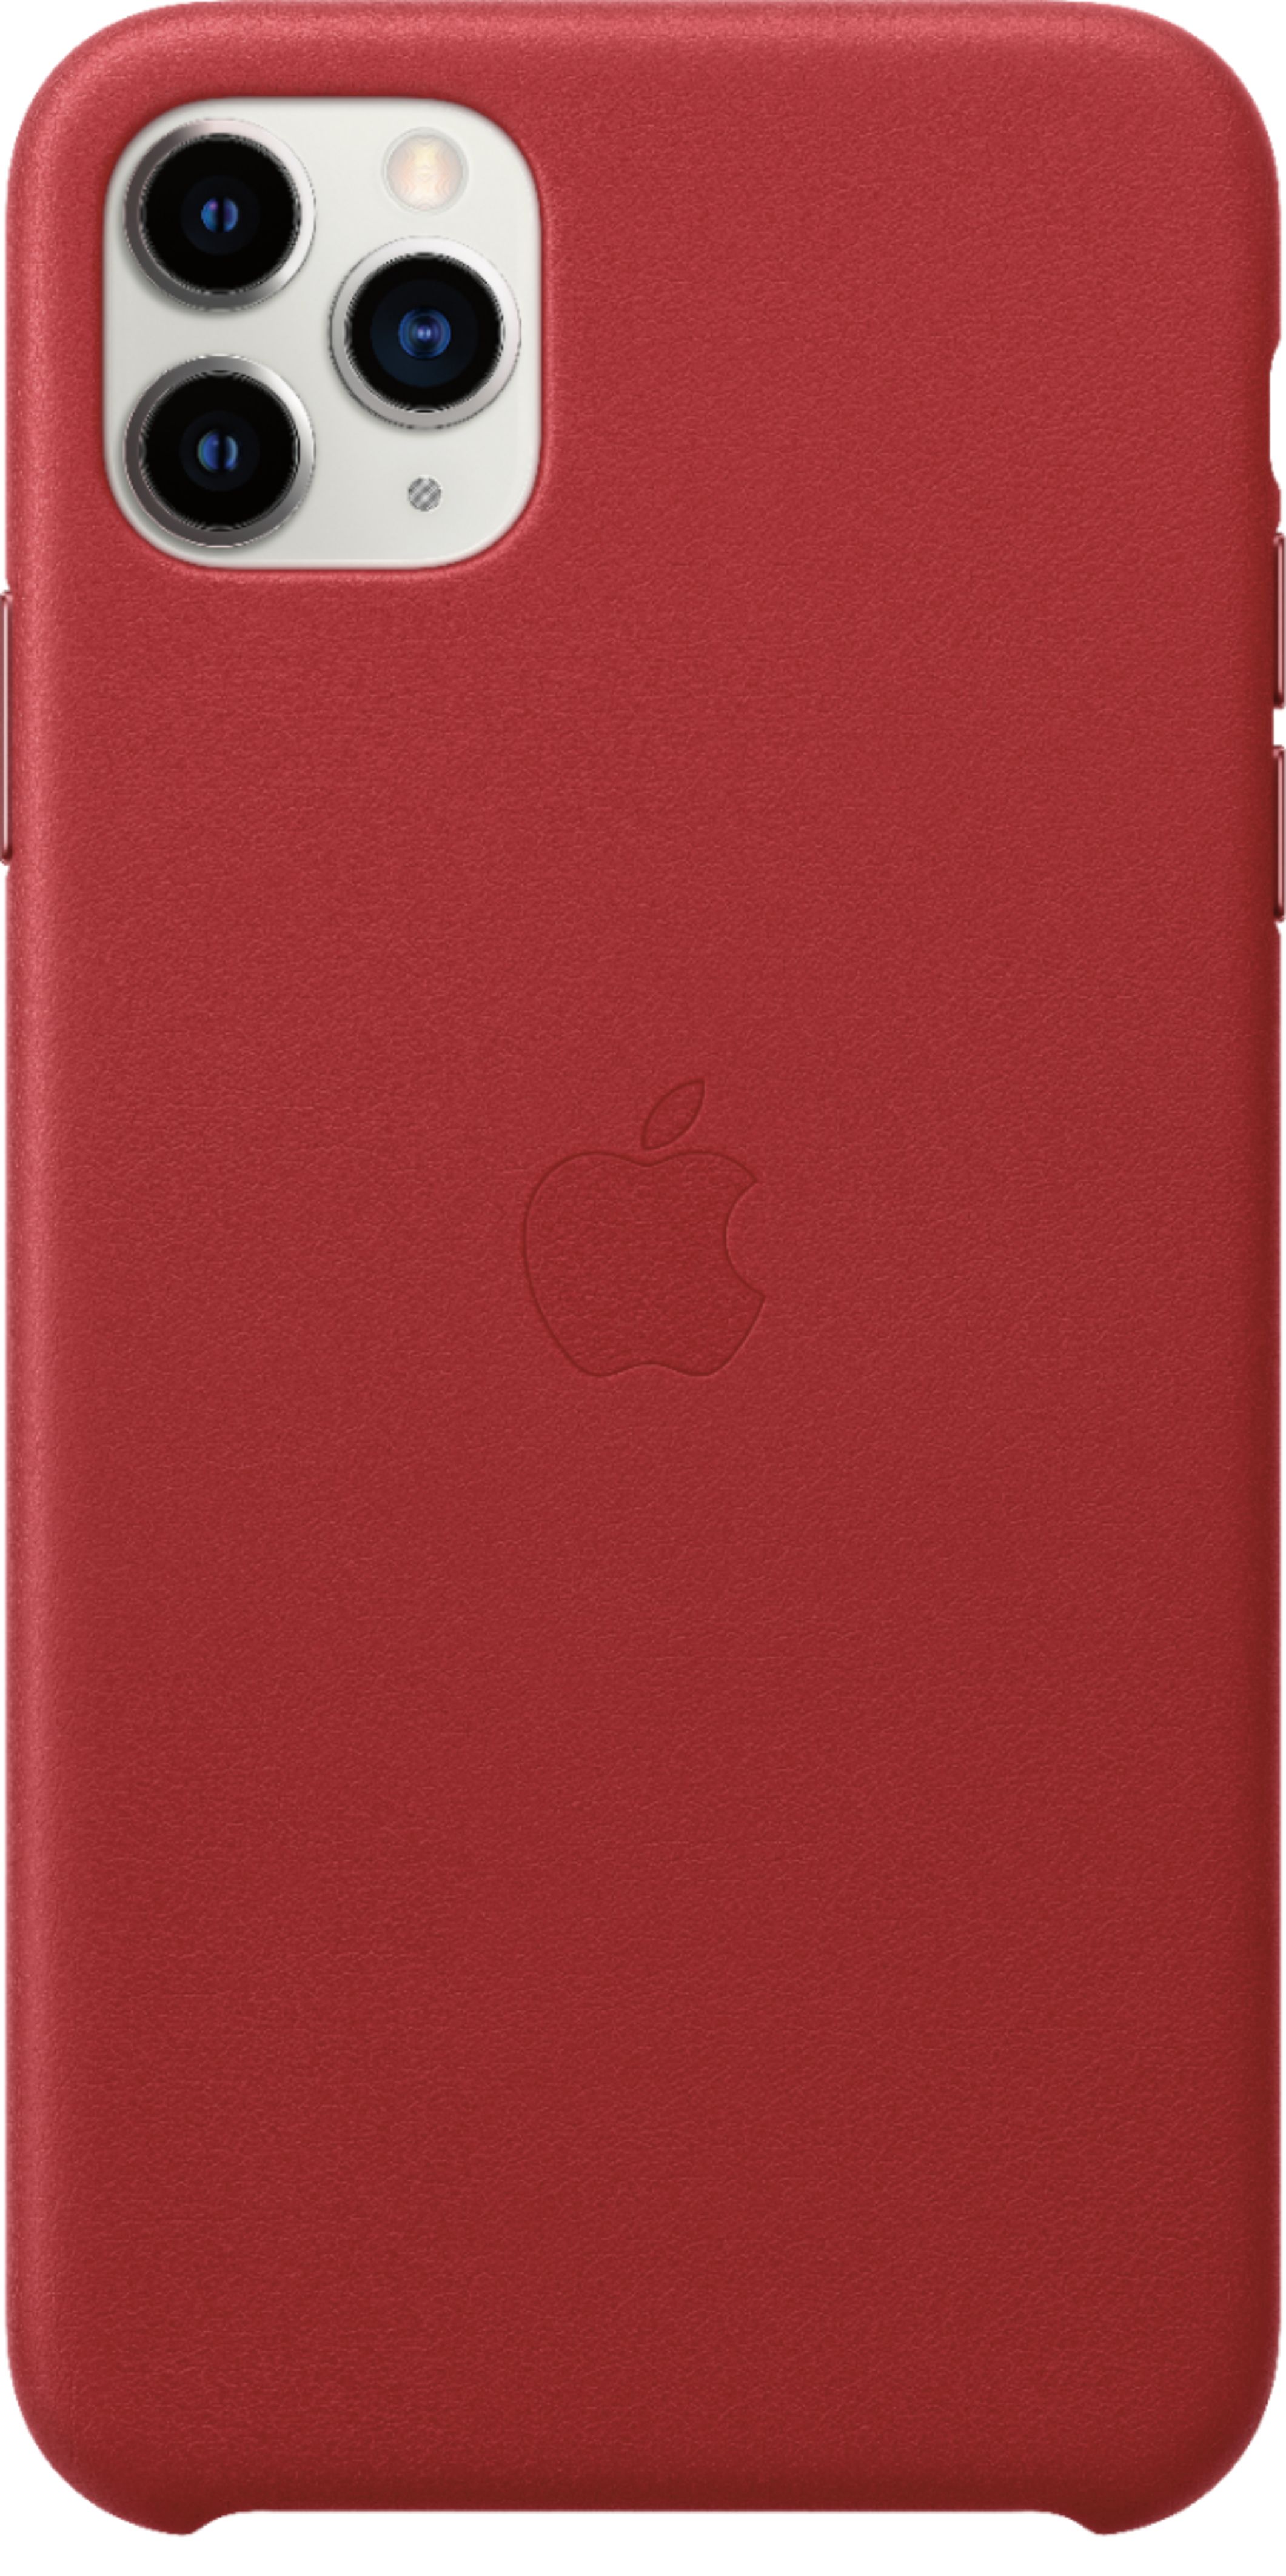 Apple Iphone 11 Pro Max Leather Case Product Red Mx0f2zm A Best Buy